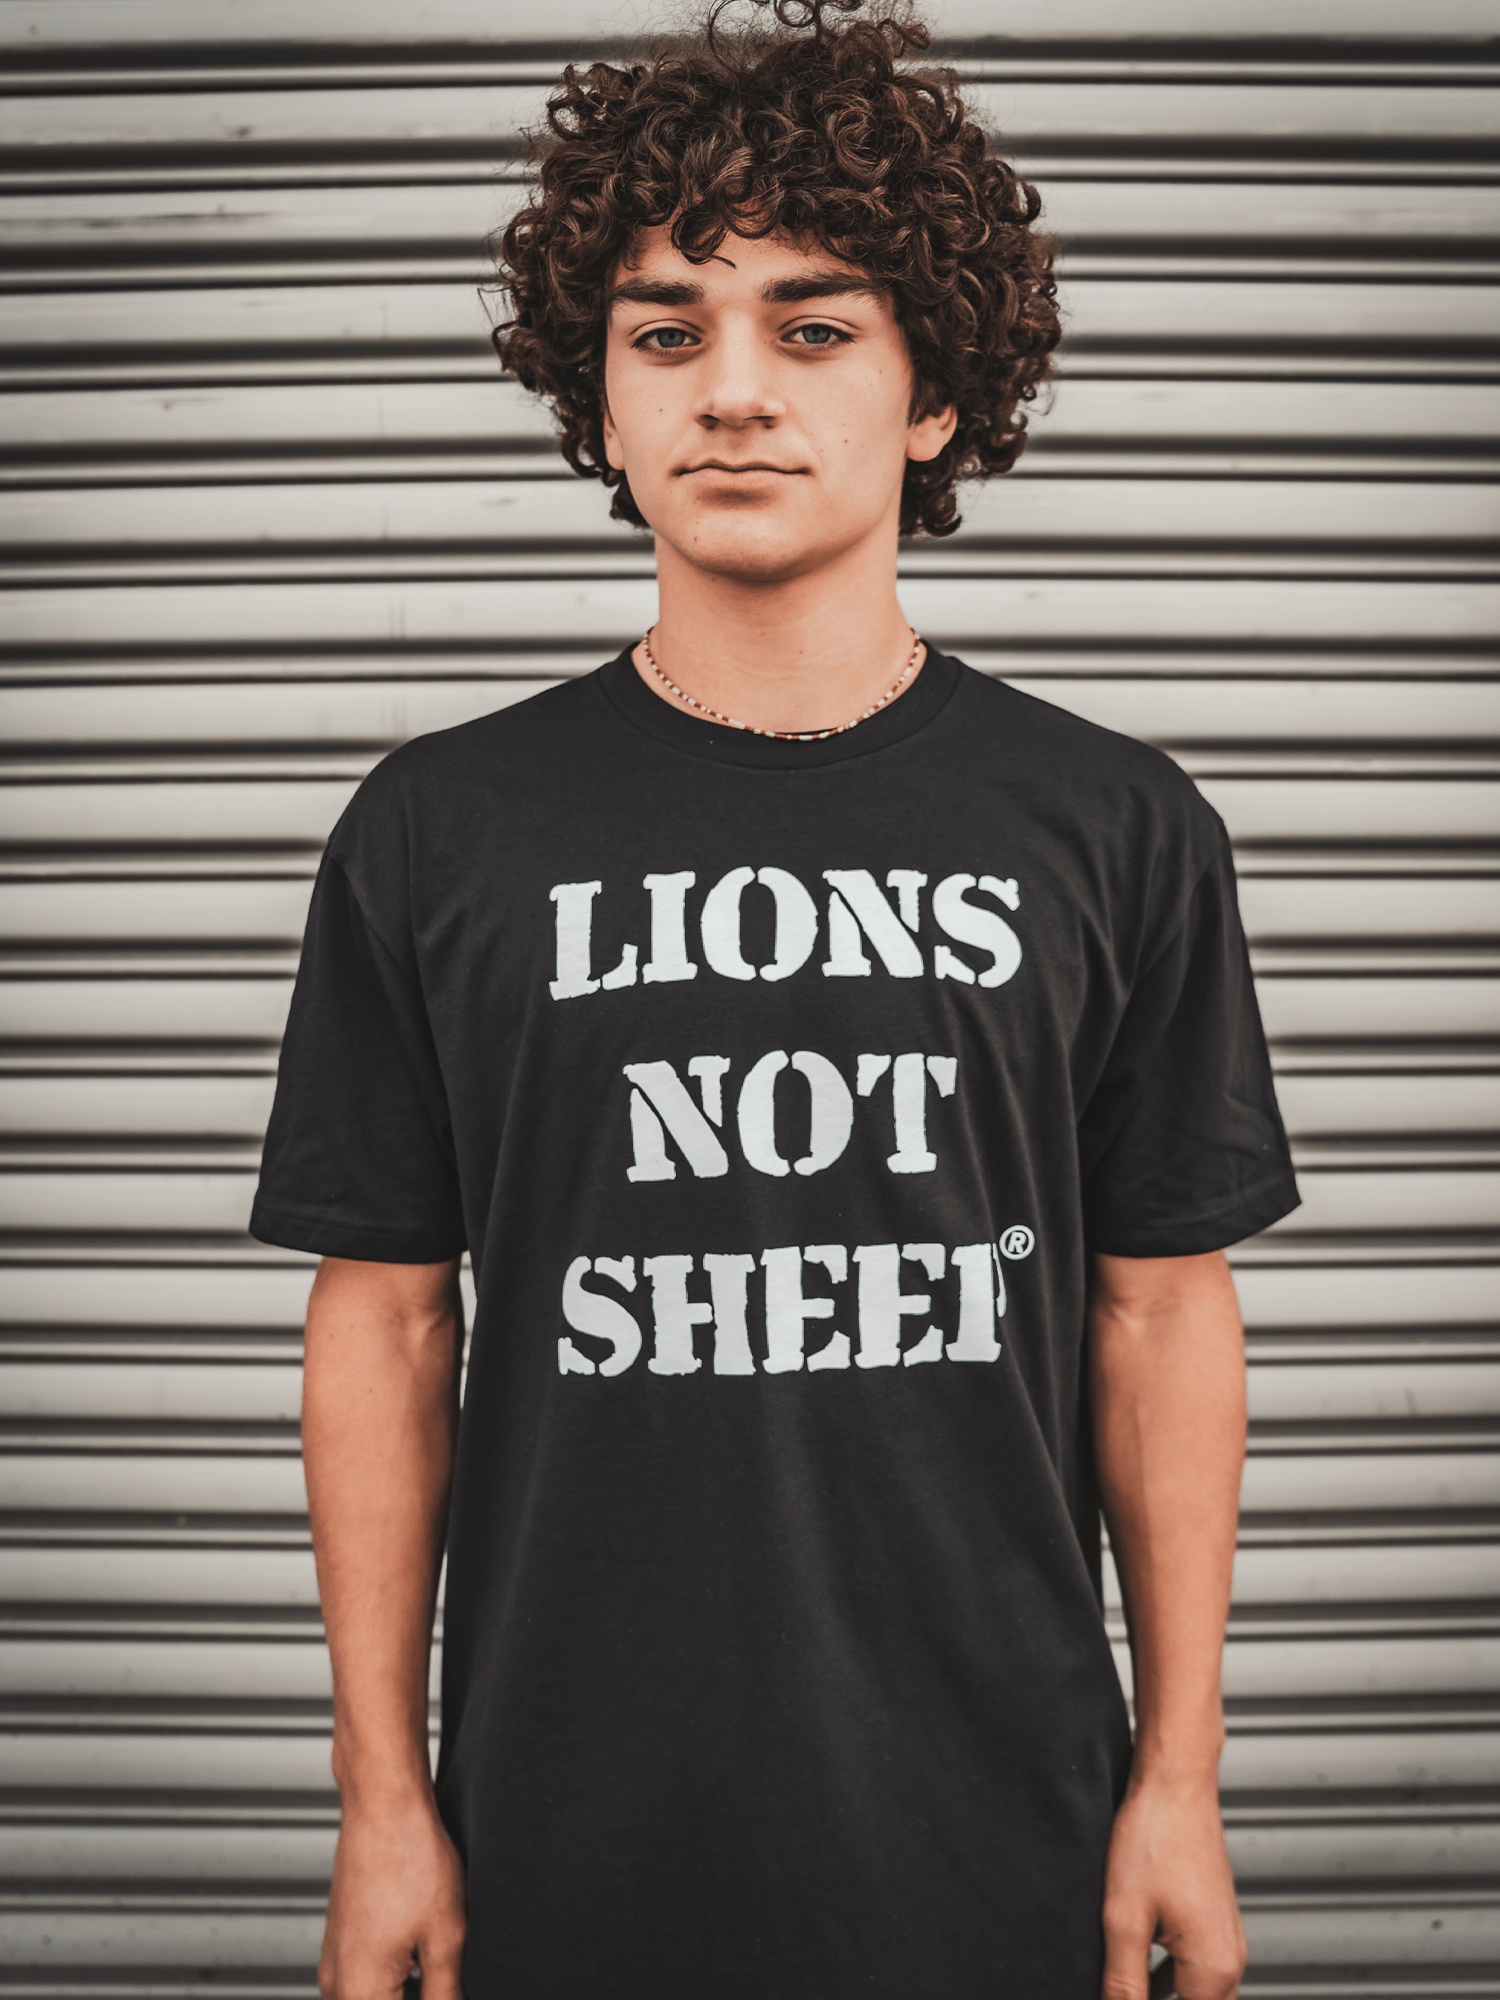 Lions Not Sheep "OG" Youth Tee - Lions Not Sheep ®